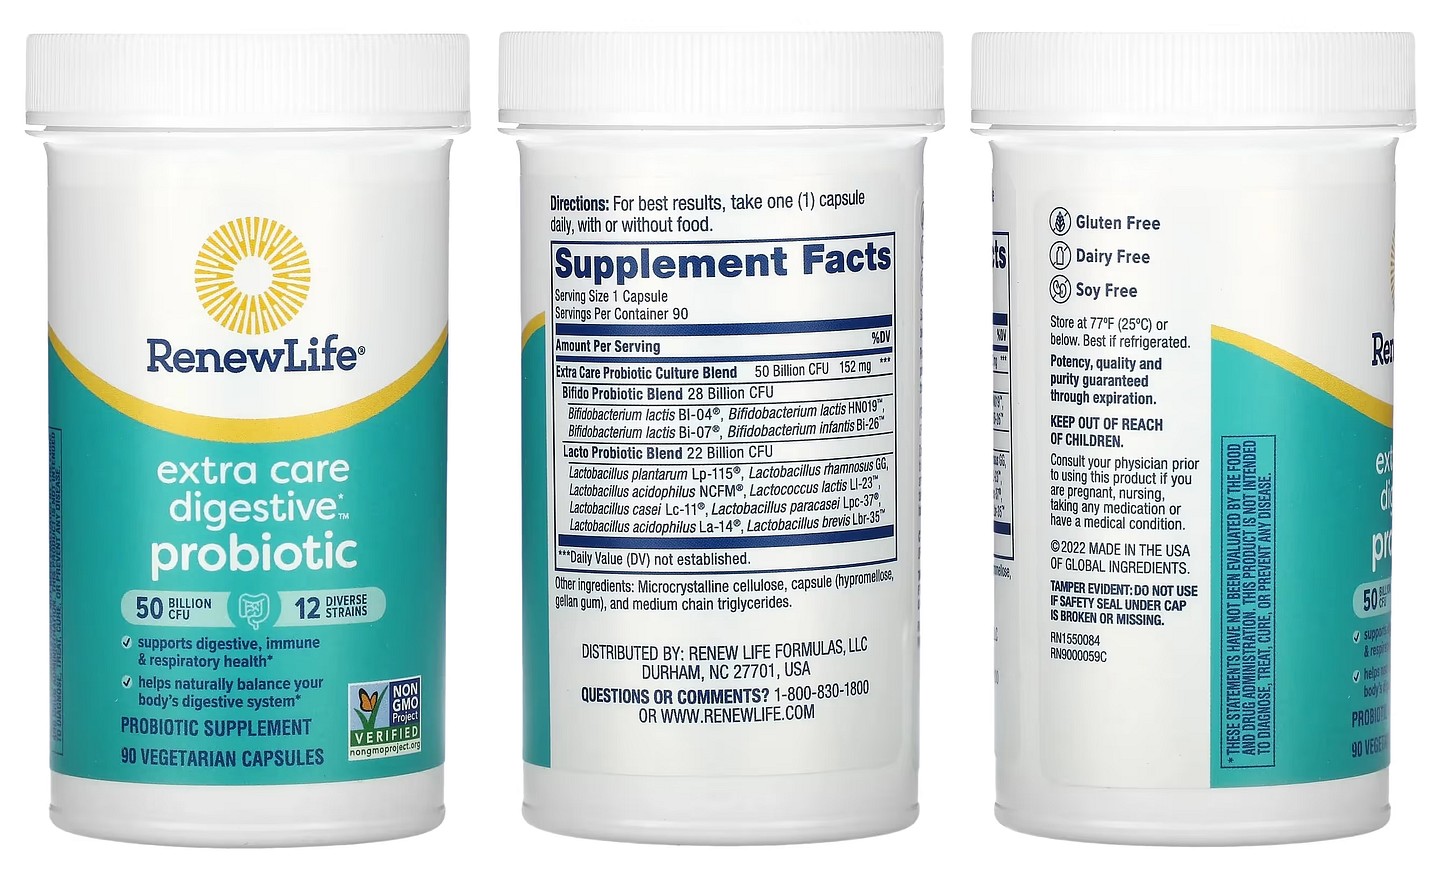 Renew Life, Extra Care Digestive Probiotic packaging